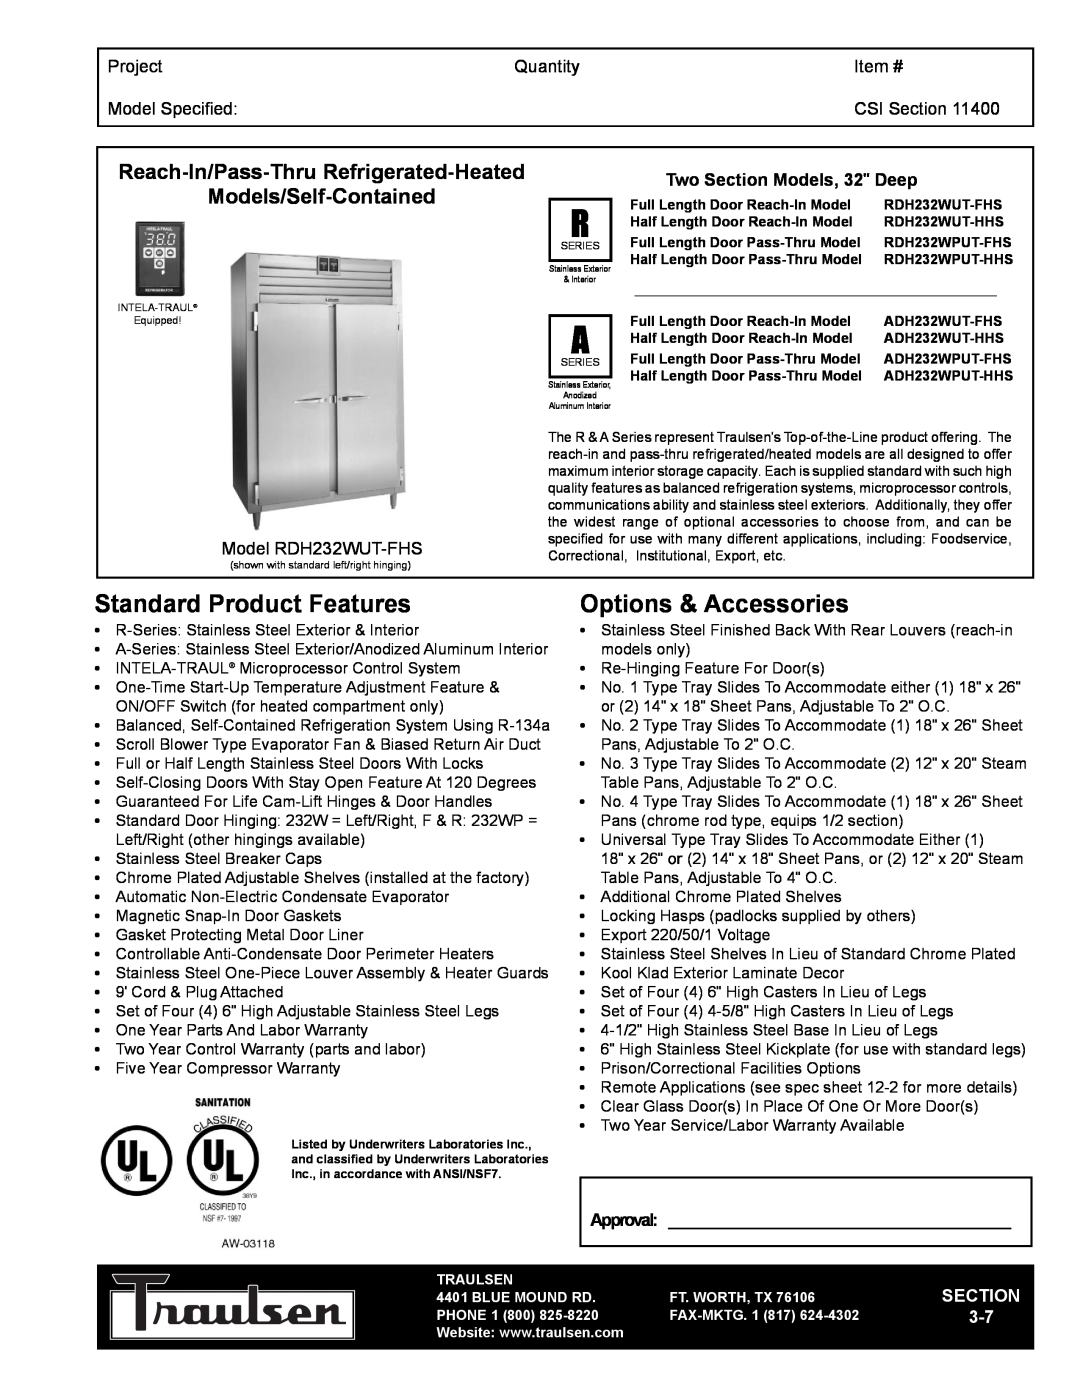 Traulsen RDH232WUT-FHS warranty Reach-In/Pass-Thru Refrigerated-Heated, Models/Self-Contained, Project, Quantity, Item # 